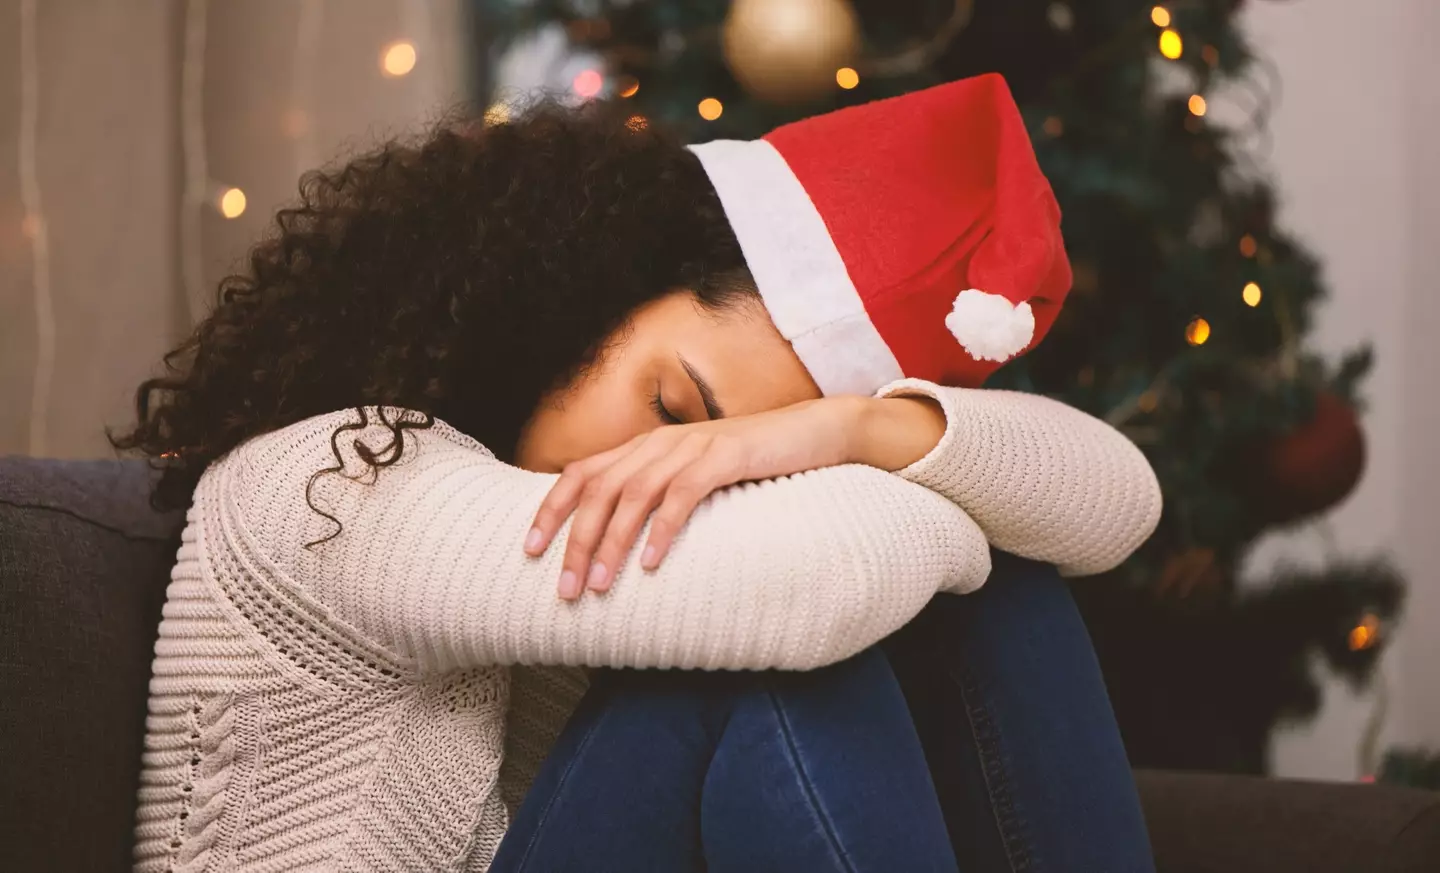 The dating trend might spell heartbreak for some over the holiday season.